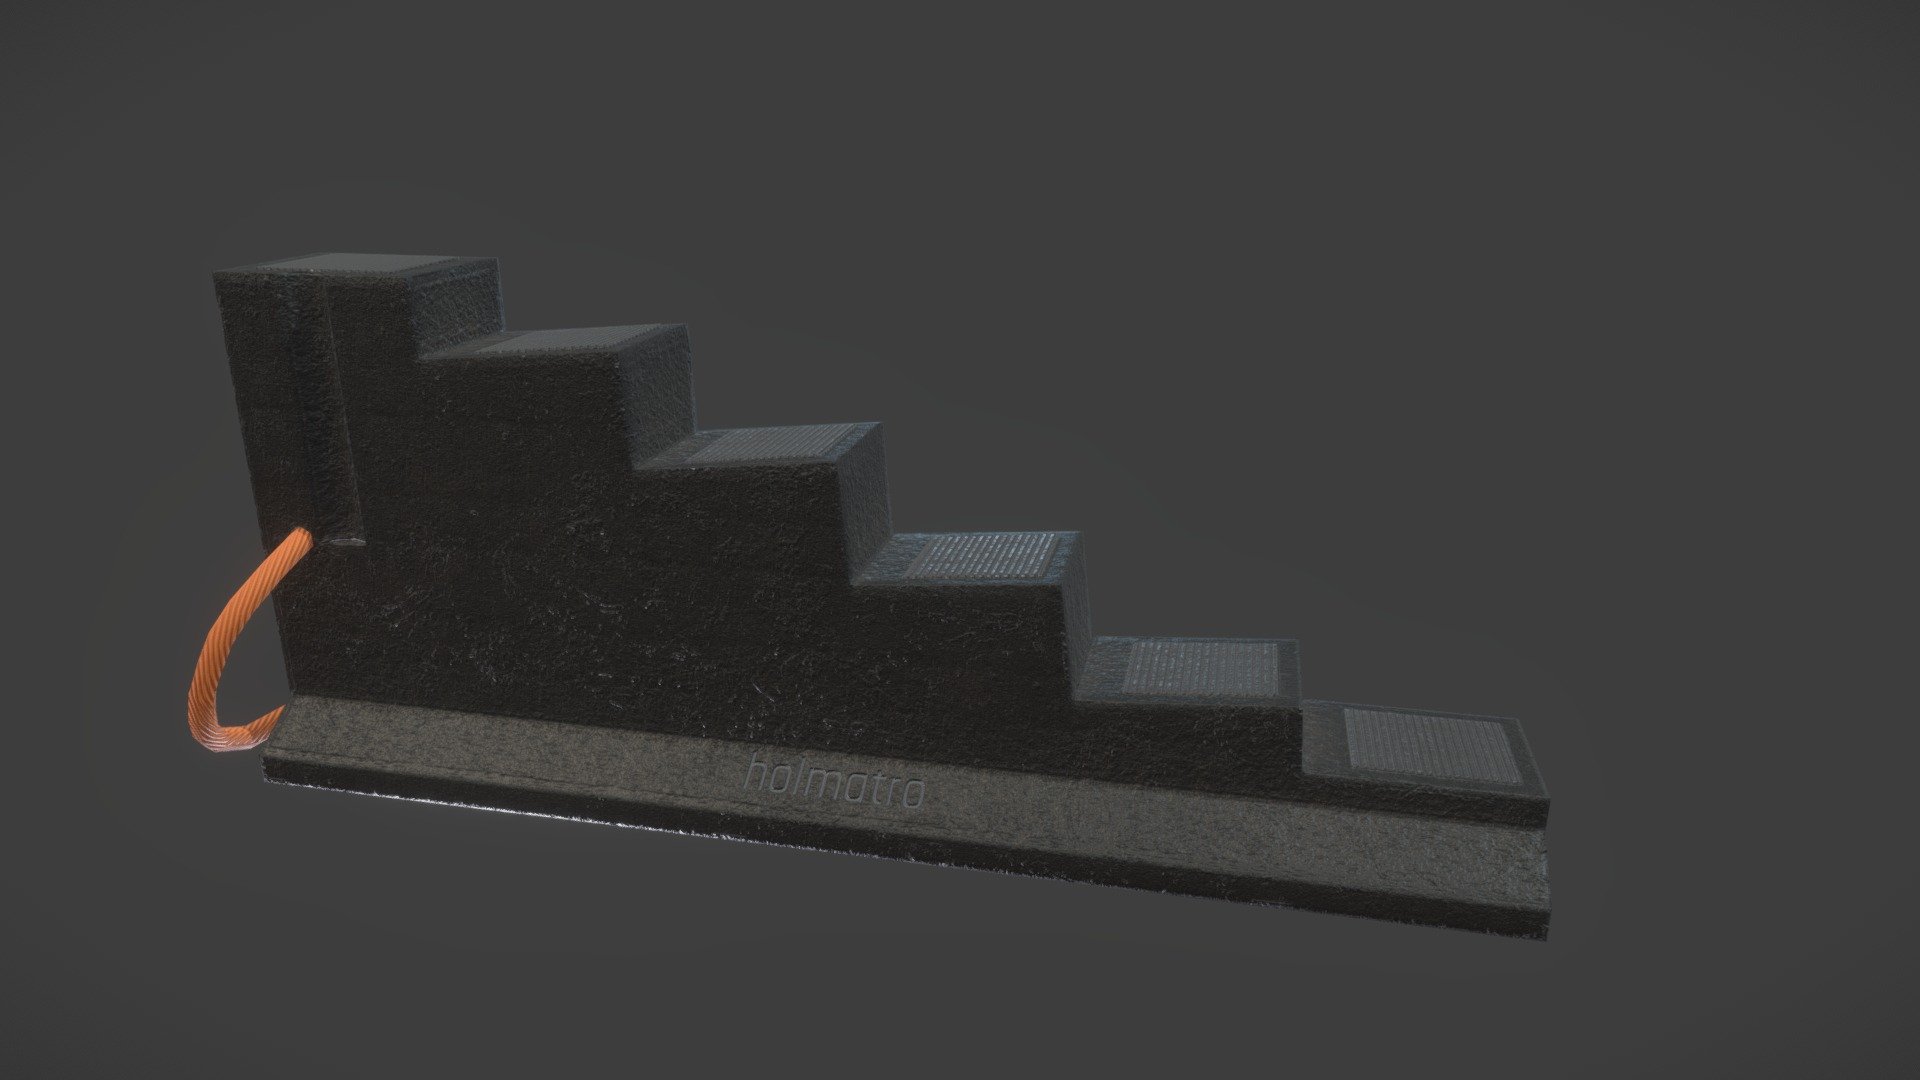 I modelled this for work reasons

Used to stabalize vehicles - Wedge/Chocks/Blocks - 3D model by imagi_101 3d model